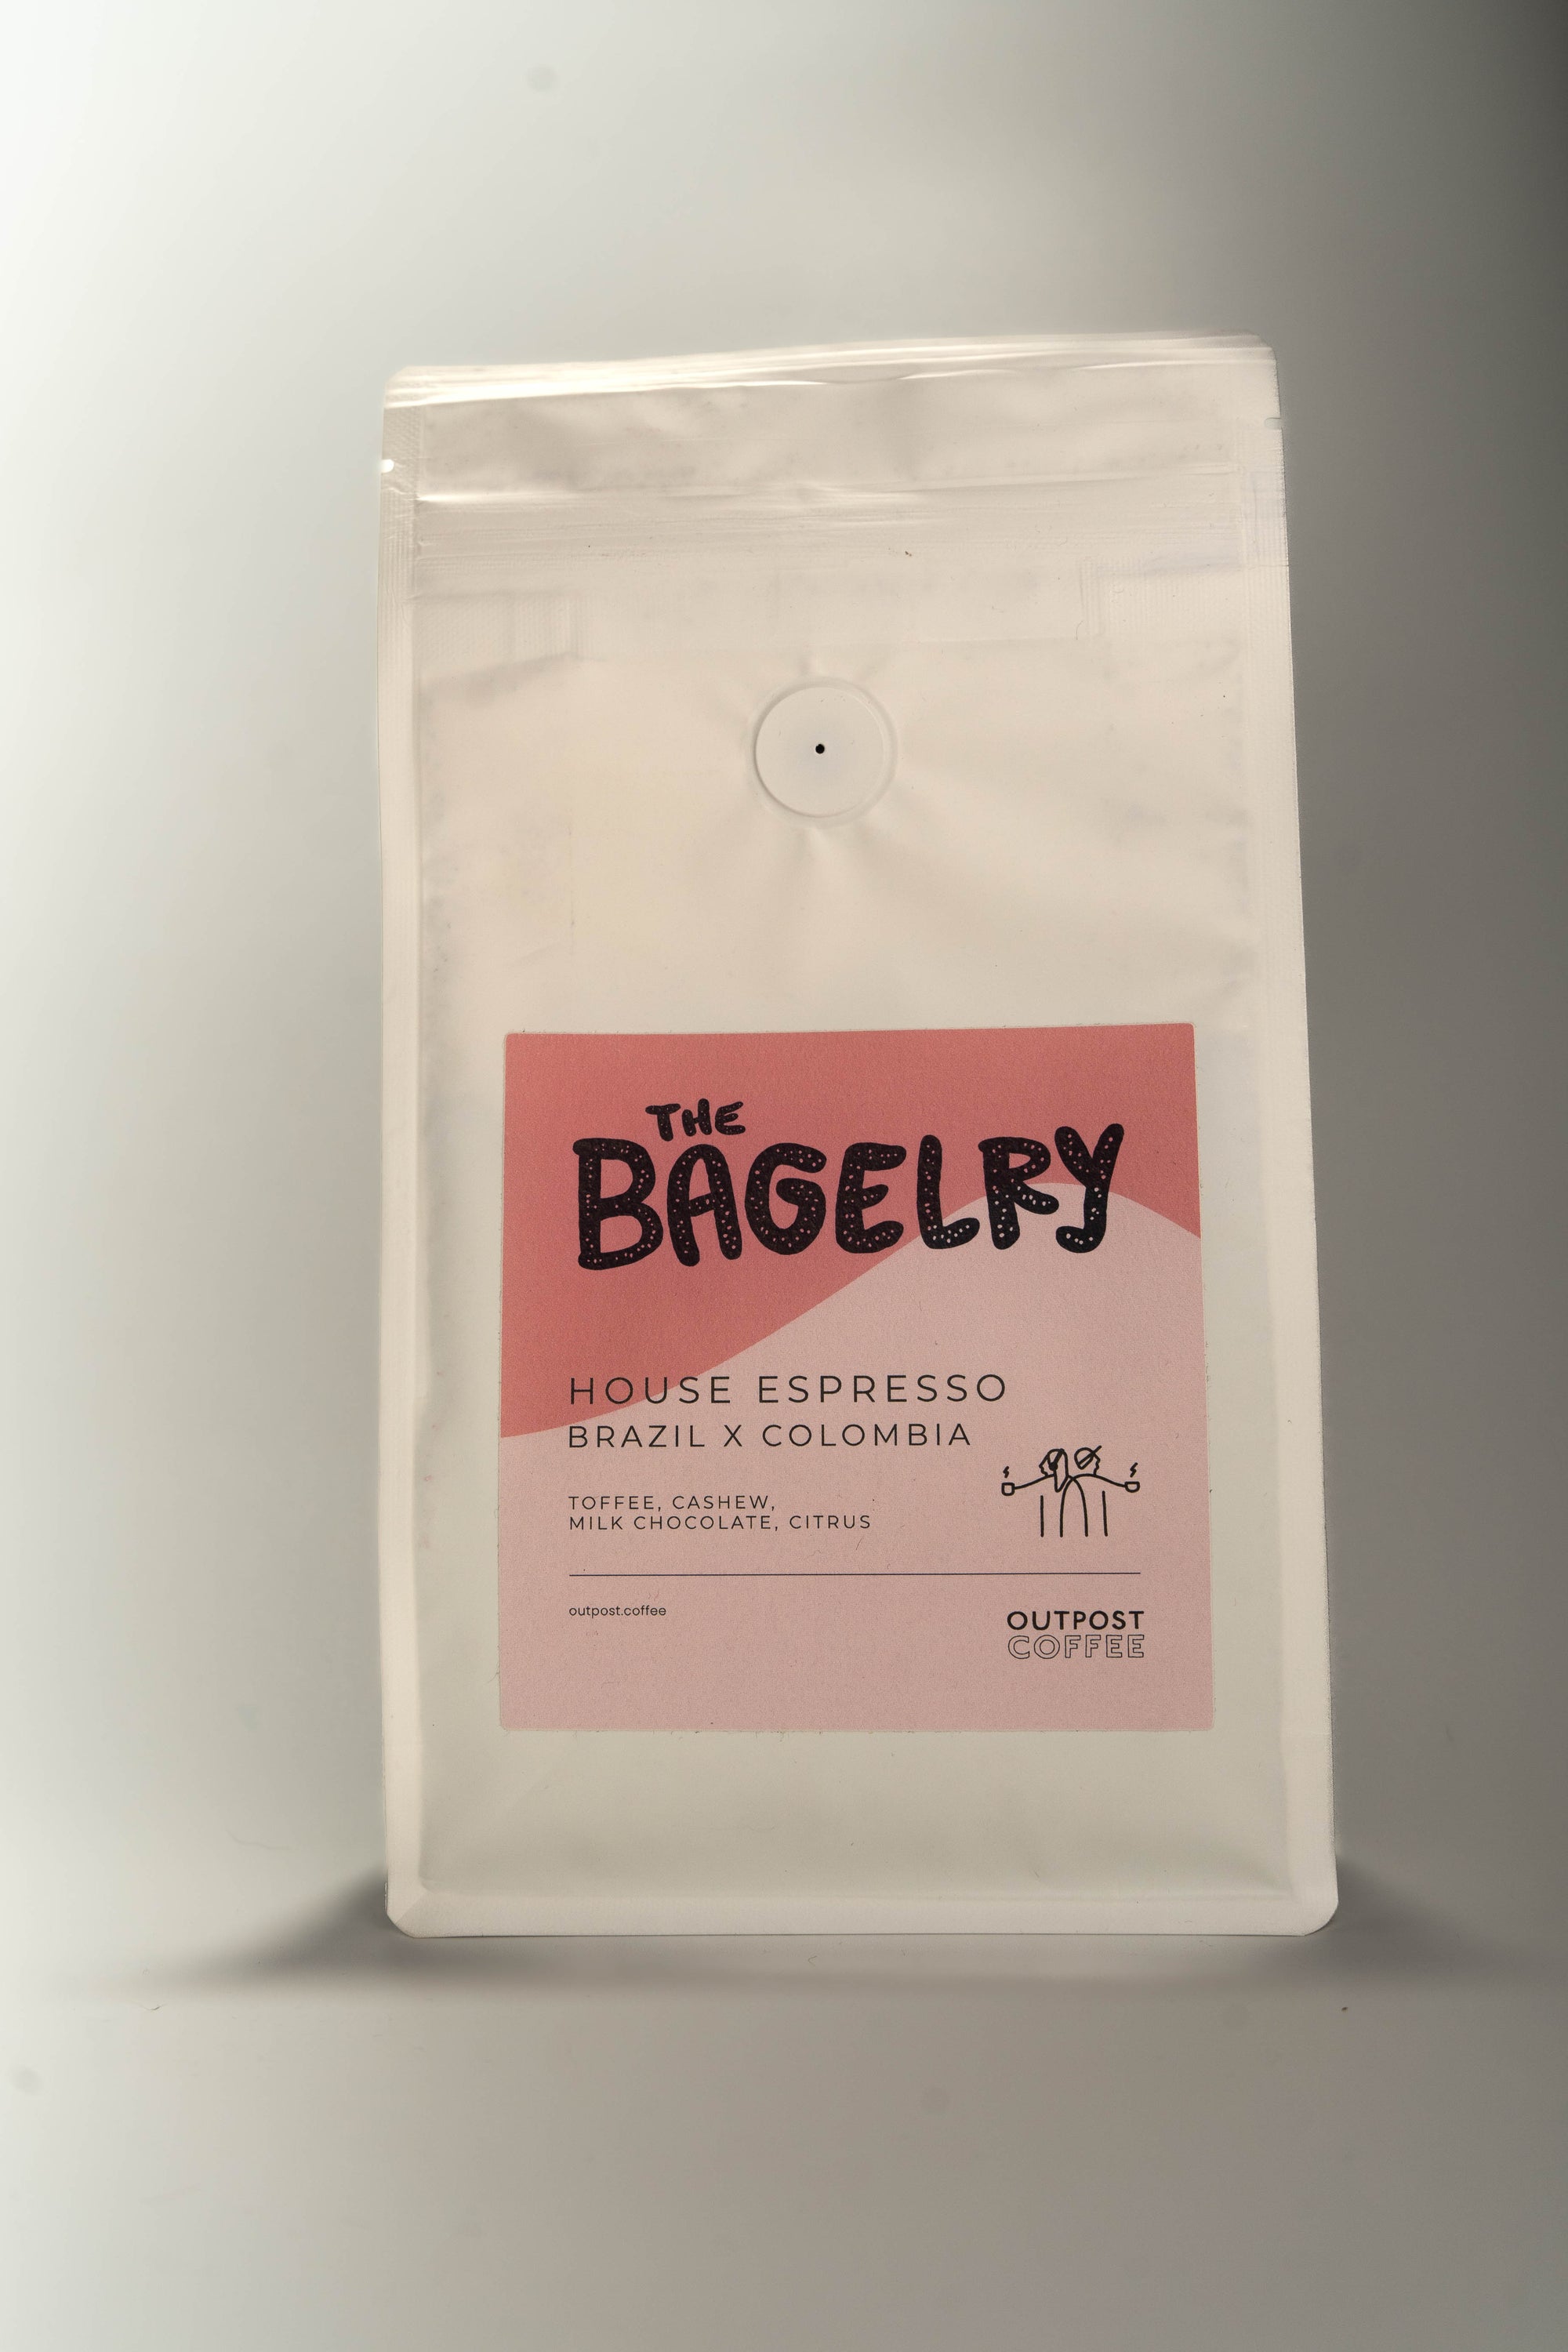 The Bagelry House Espresso